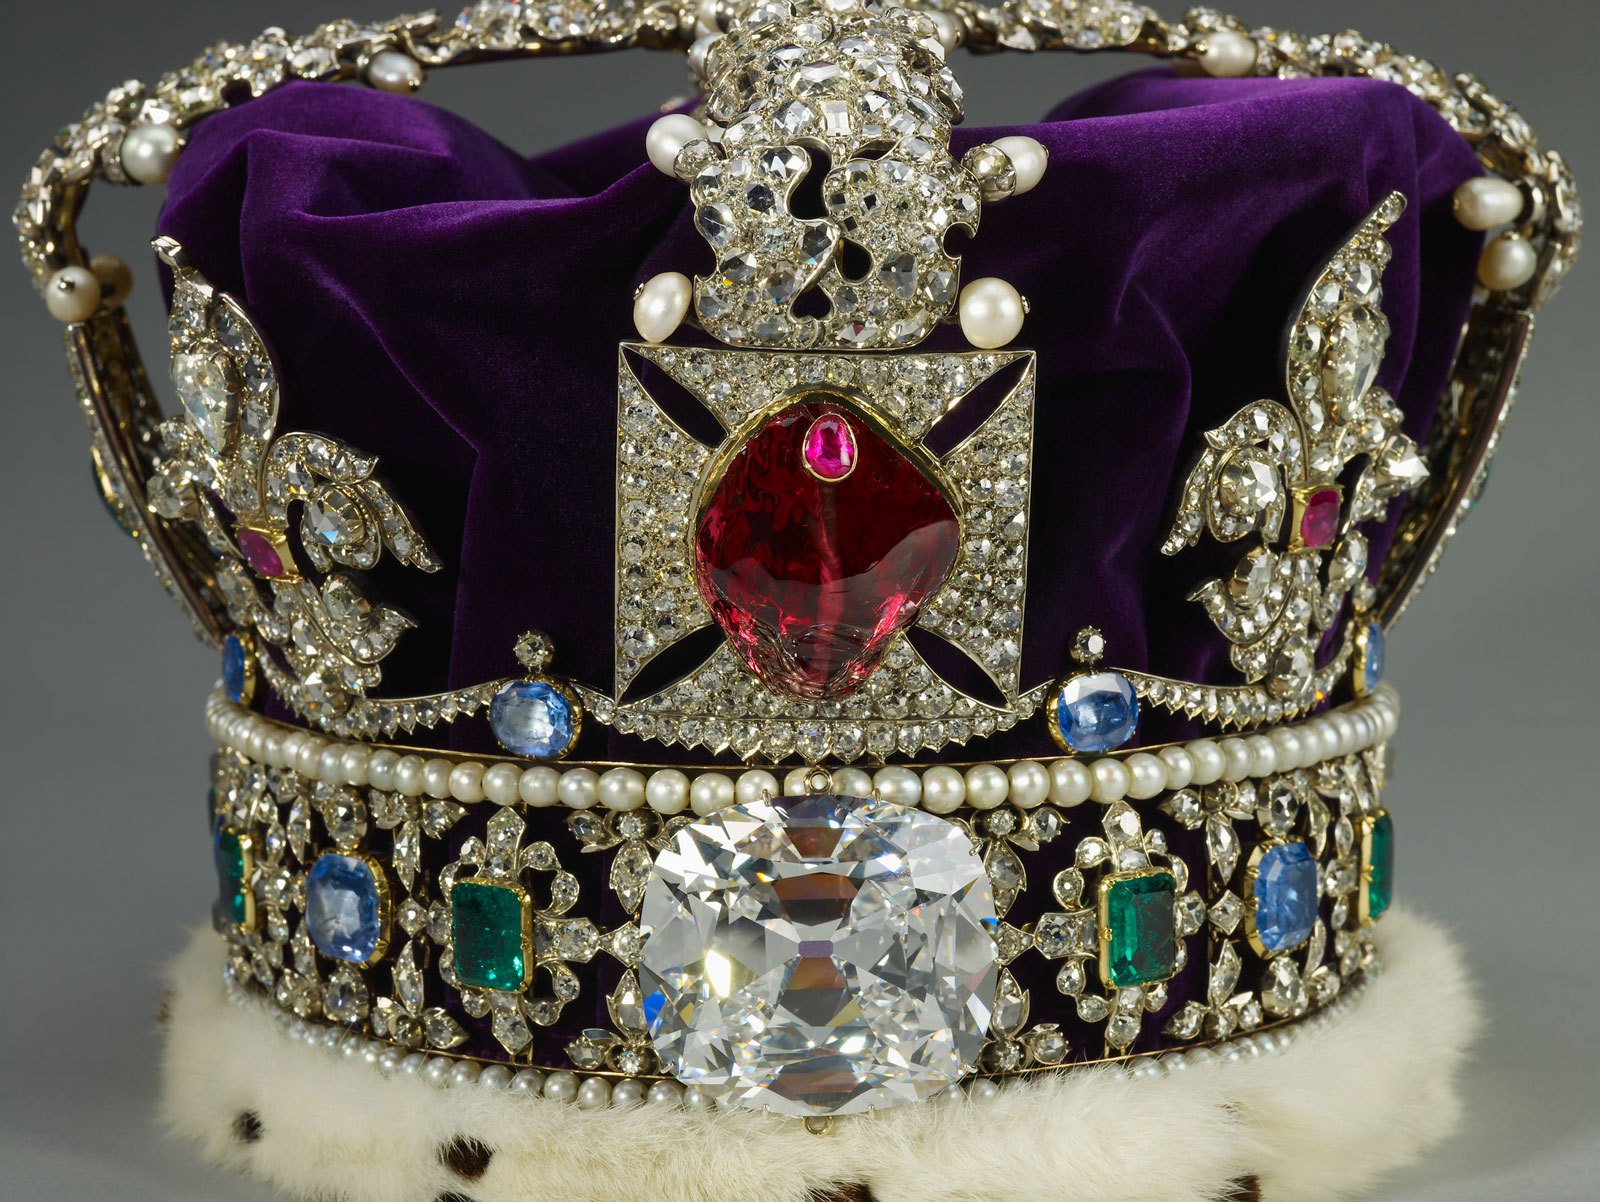 The Black Prince's ruby, a historic red spinel set in the Imperial State Crown and displayed in the Tower of London. A ruby, set in gold, is secured to the top of the spinel. (Photo: S. Greenaway, reproduced with the kind permission of H.M. The Queen. Crown Copyright reserved)